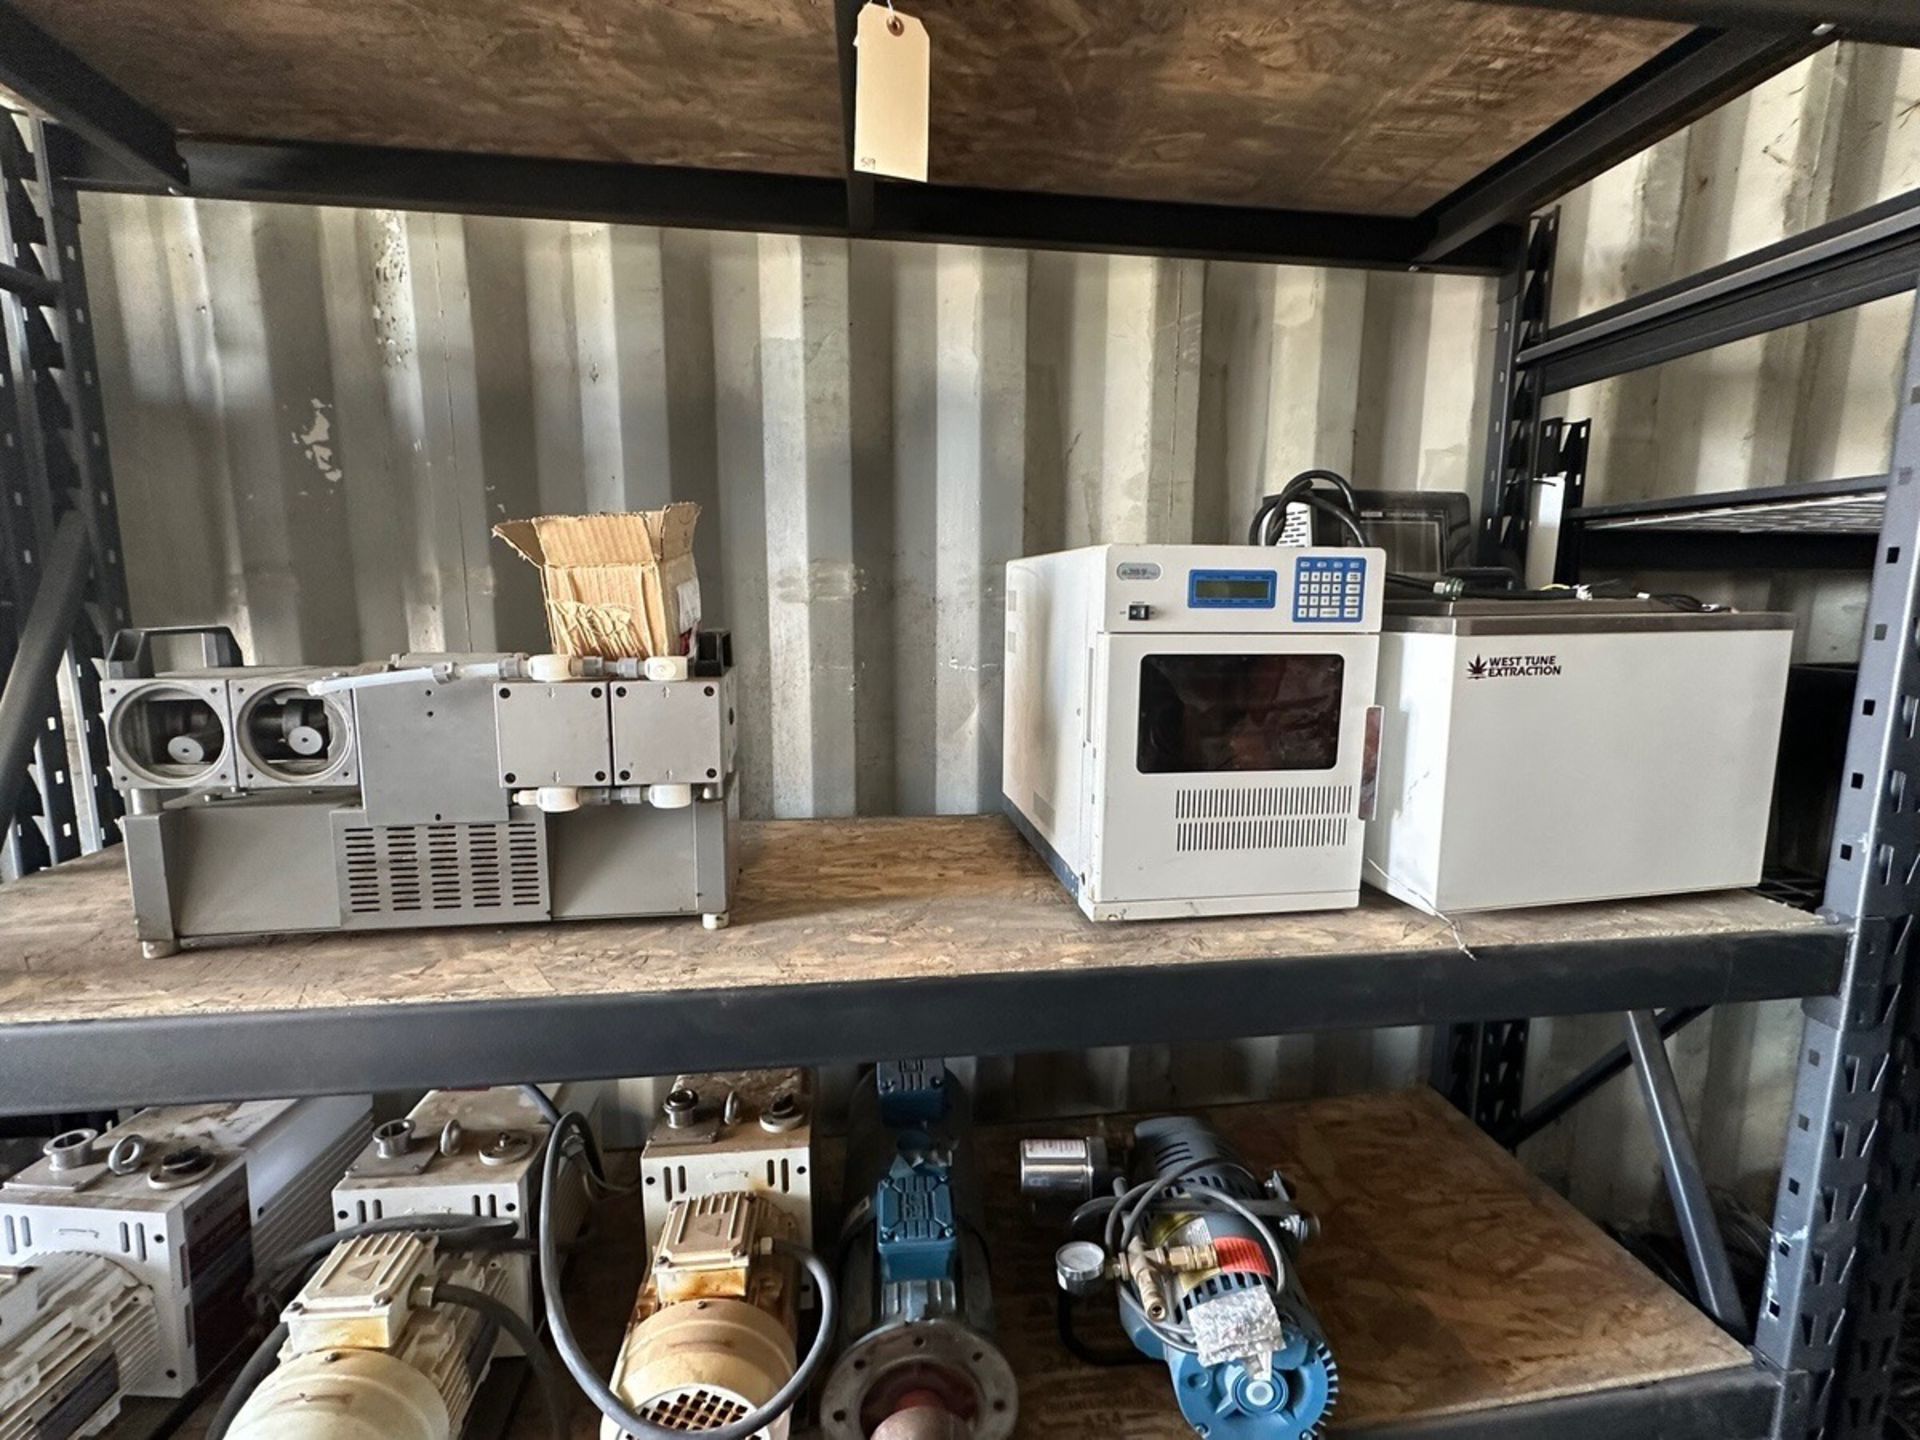 Shelf With Contents, Vacuum Pumps, Filters | Rig Fee $200 - Image 2 of 17